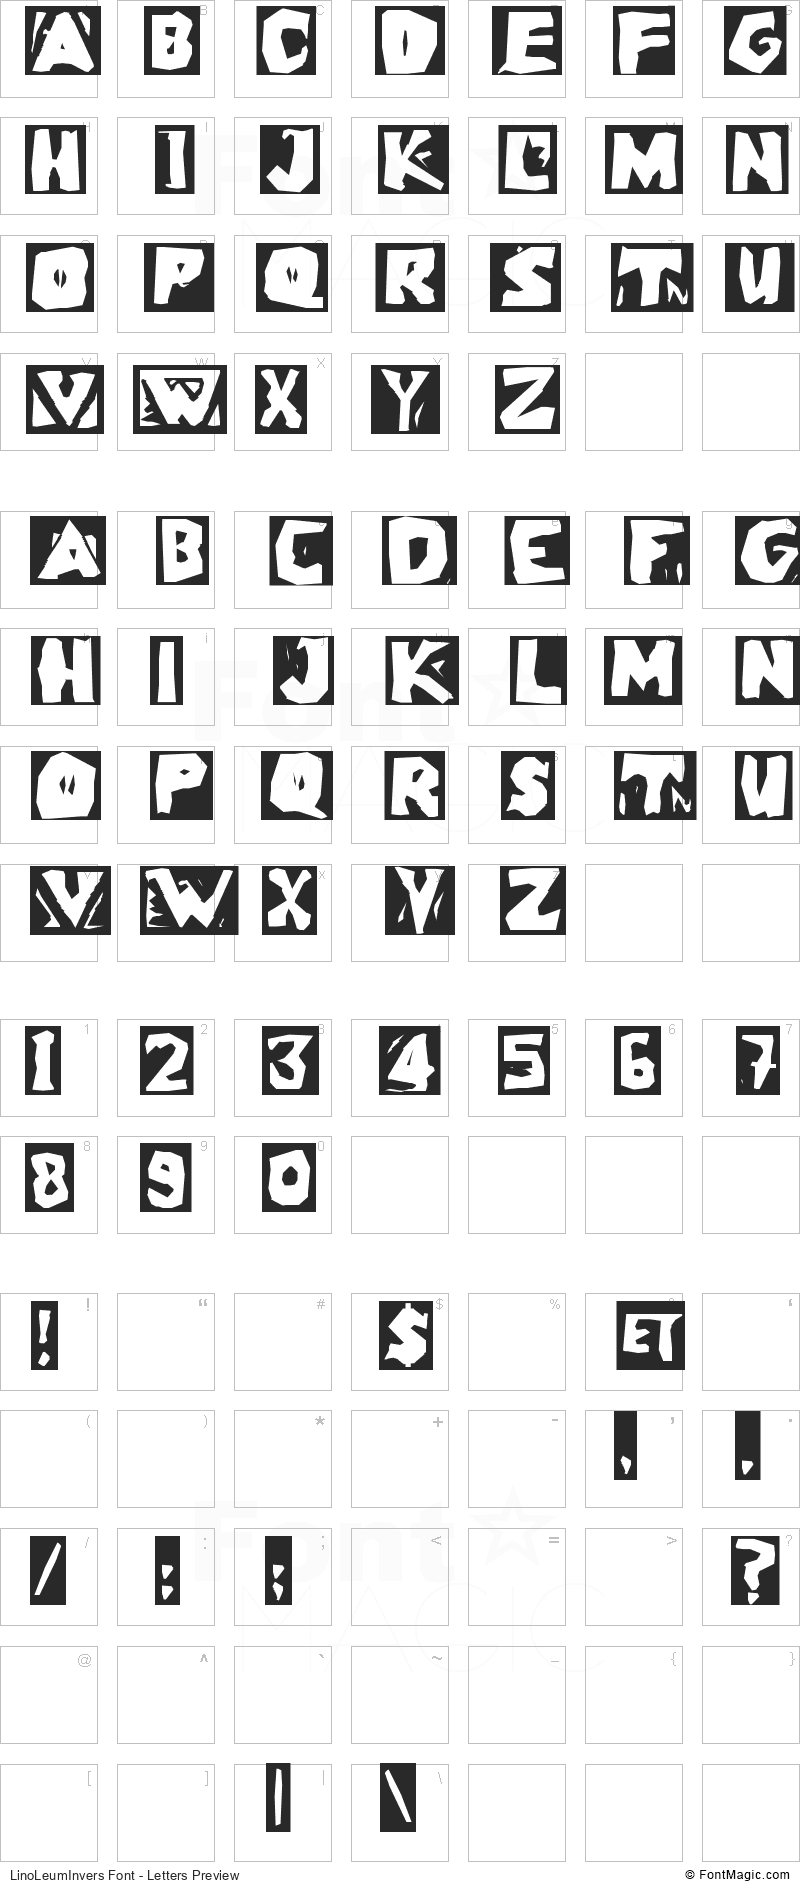 LinoLeumInvers Font - All Latters Preview Chart